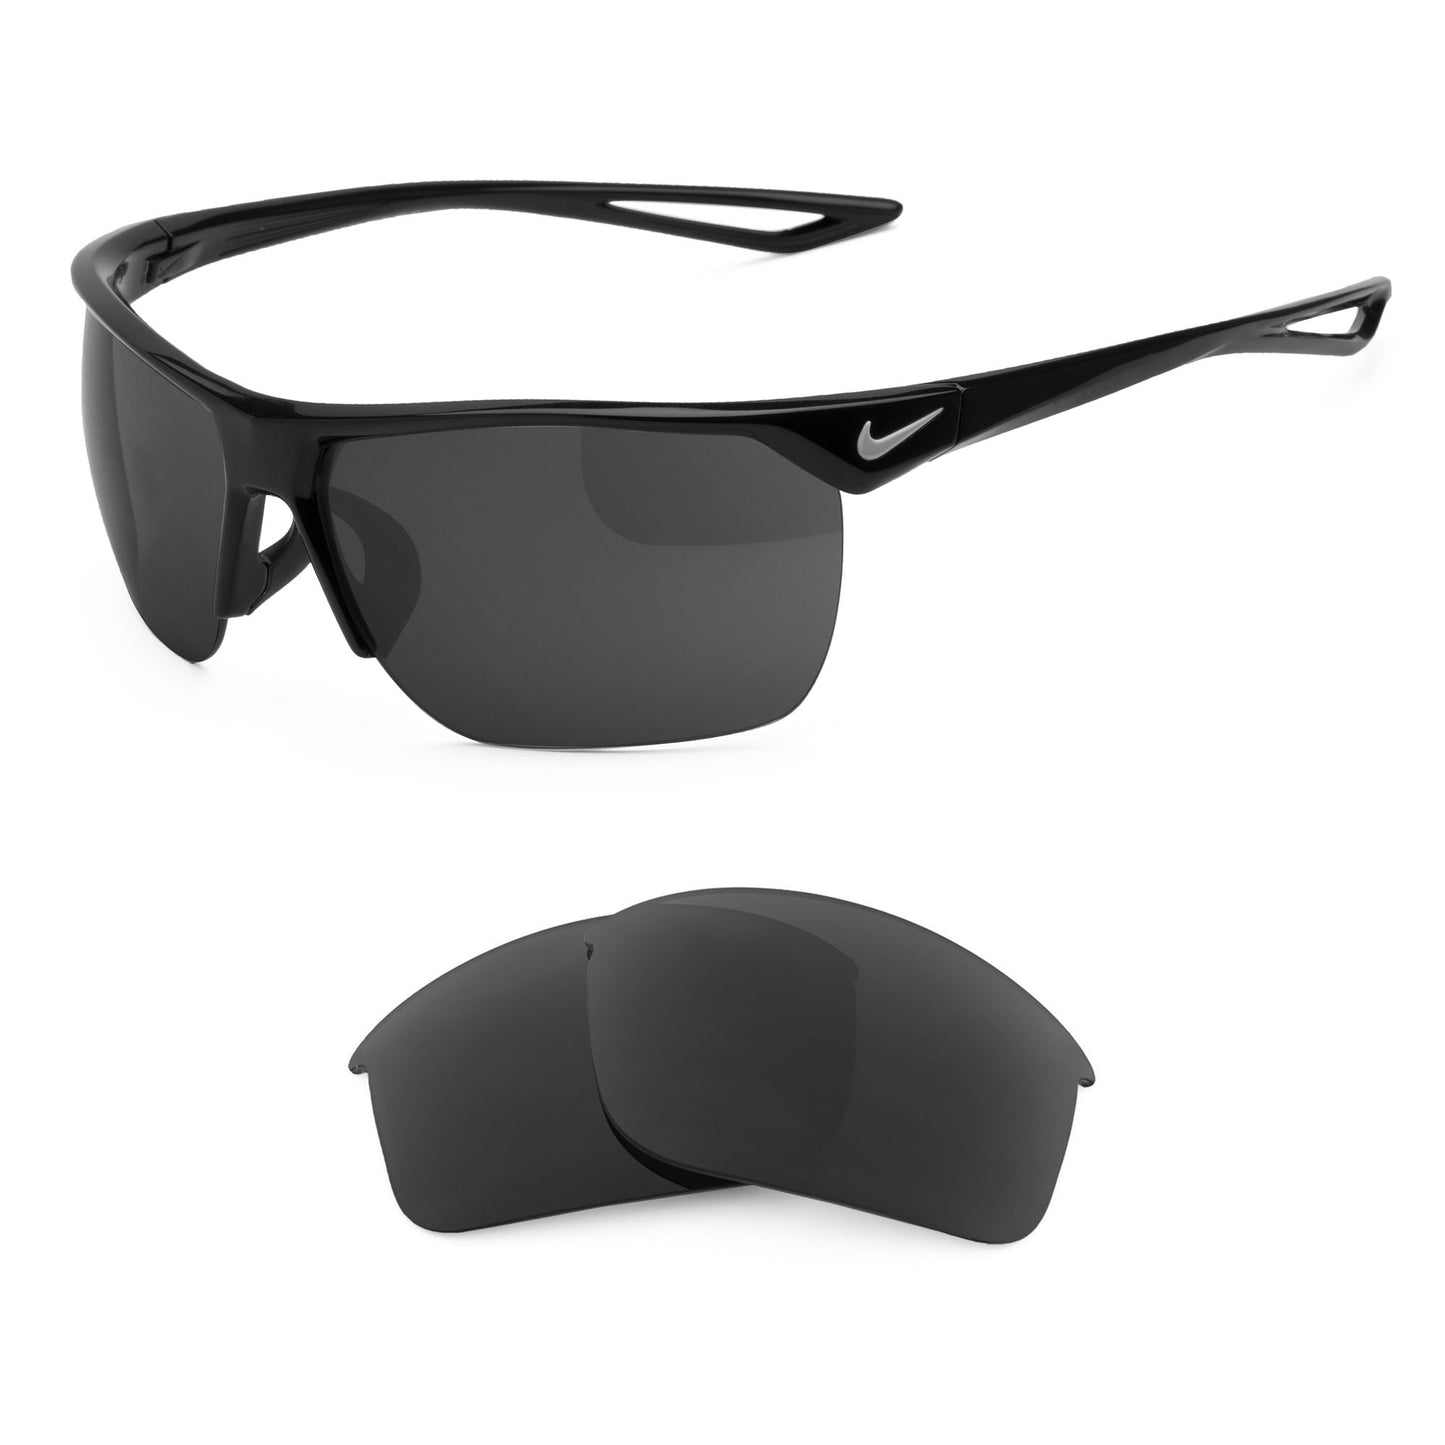 Nike Trainer sunglasses with replacement lenses